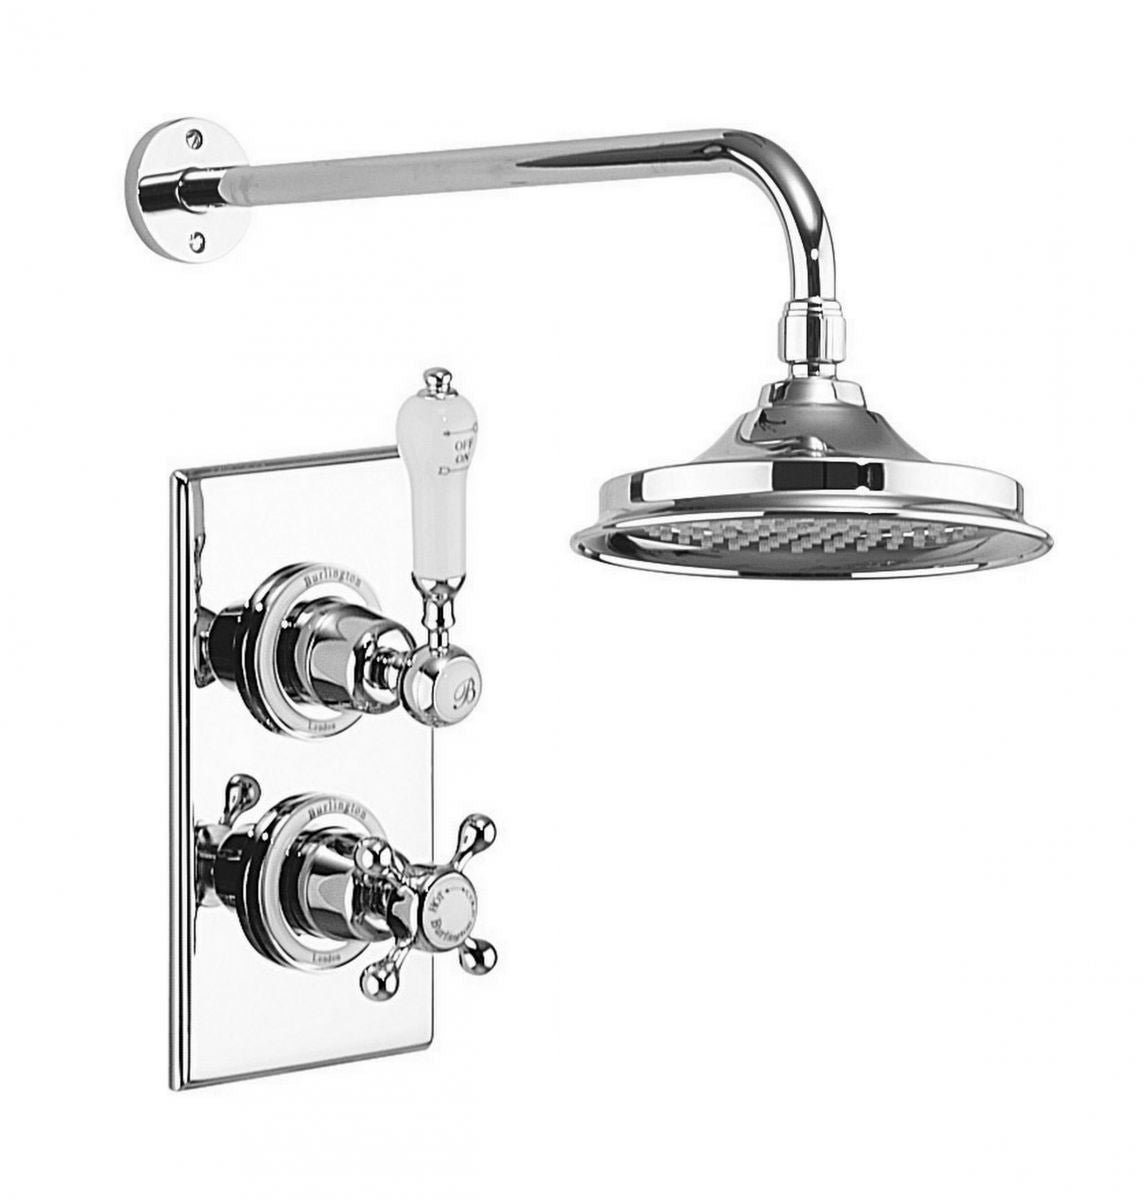 Burlington Trent Thermostatic Single Outlet Shower Valve with Fixed Shower Head Deluxe Bathrooms UK